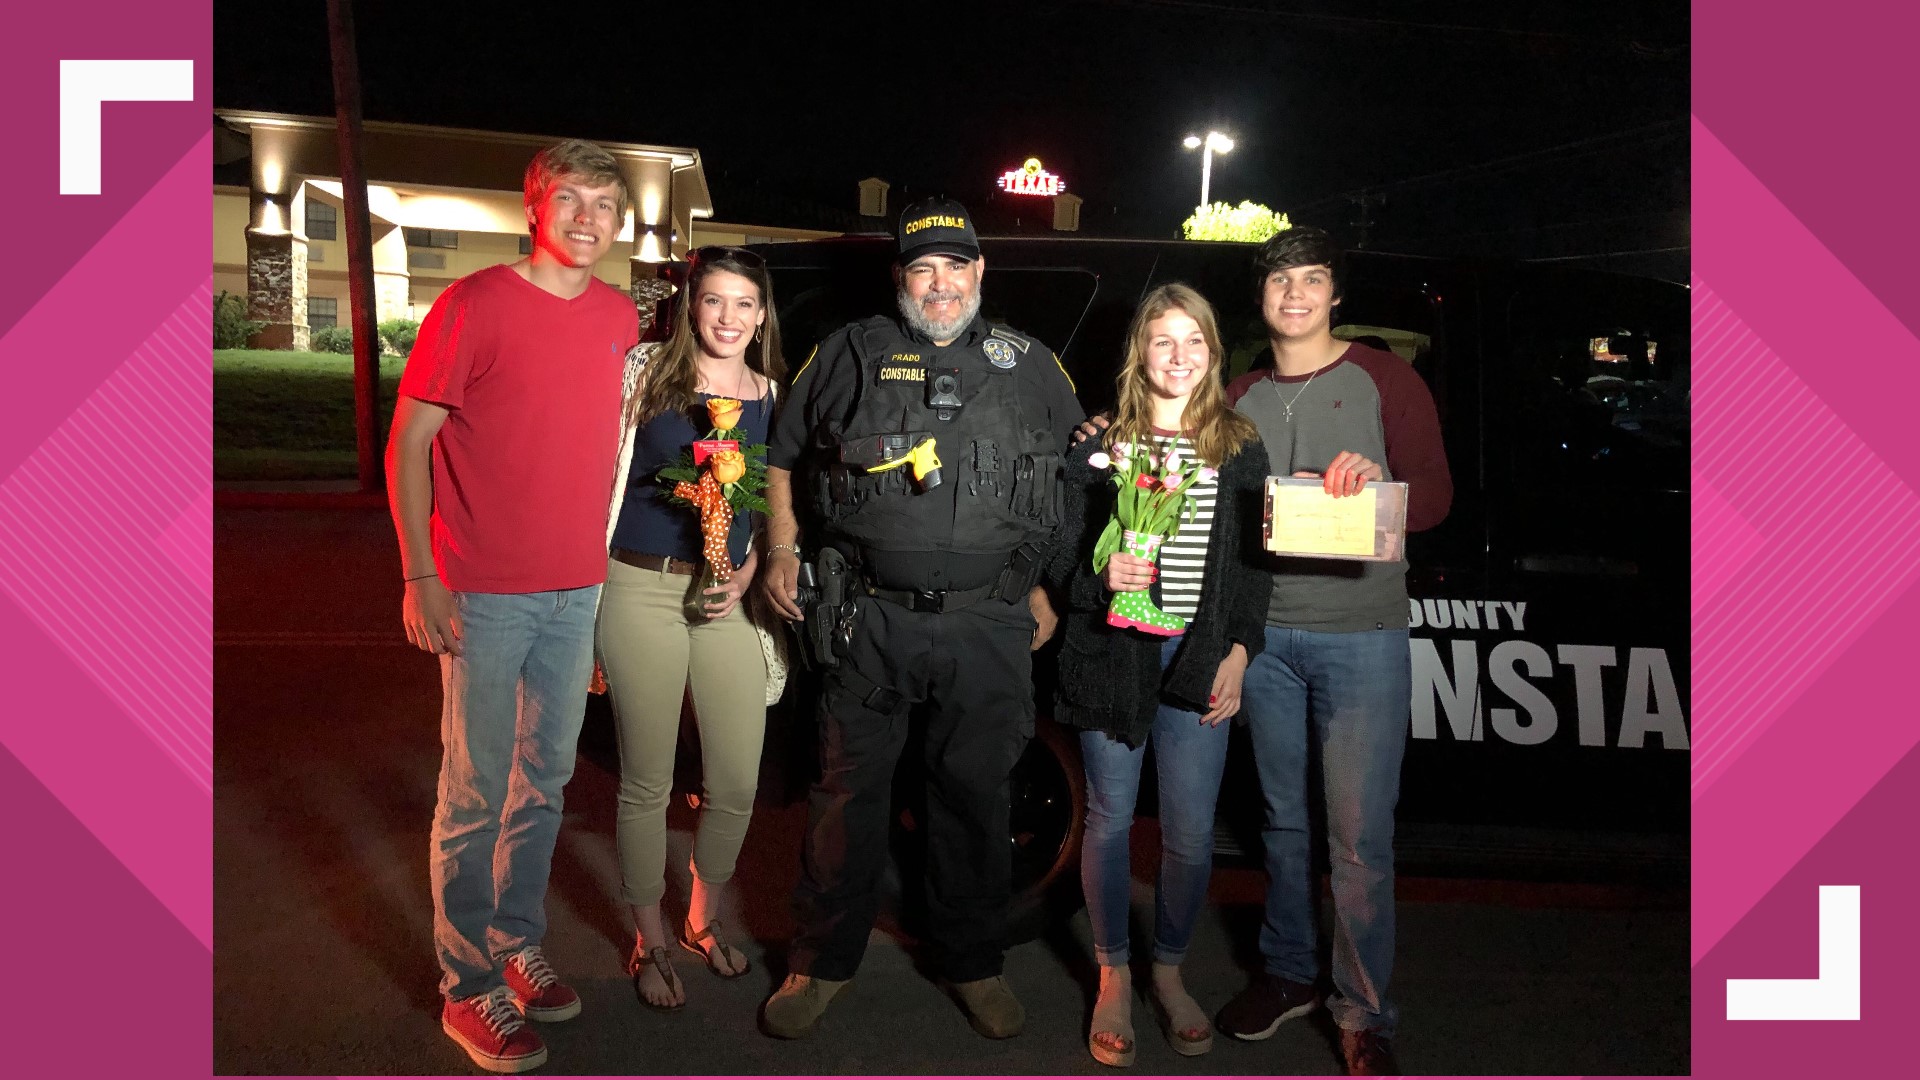 Two Troy High School juniors pulled out all the stops to ask their girlfriends to prom. They even managed to get law enforcement in on the gag.